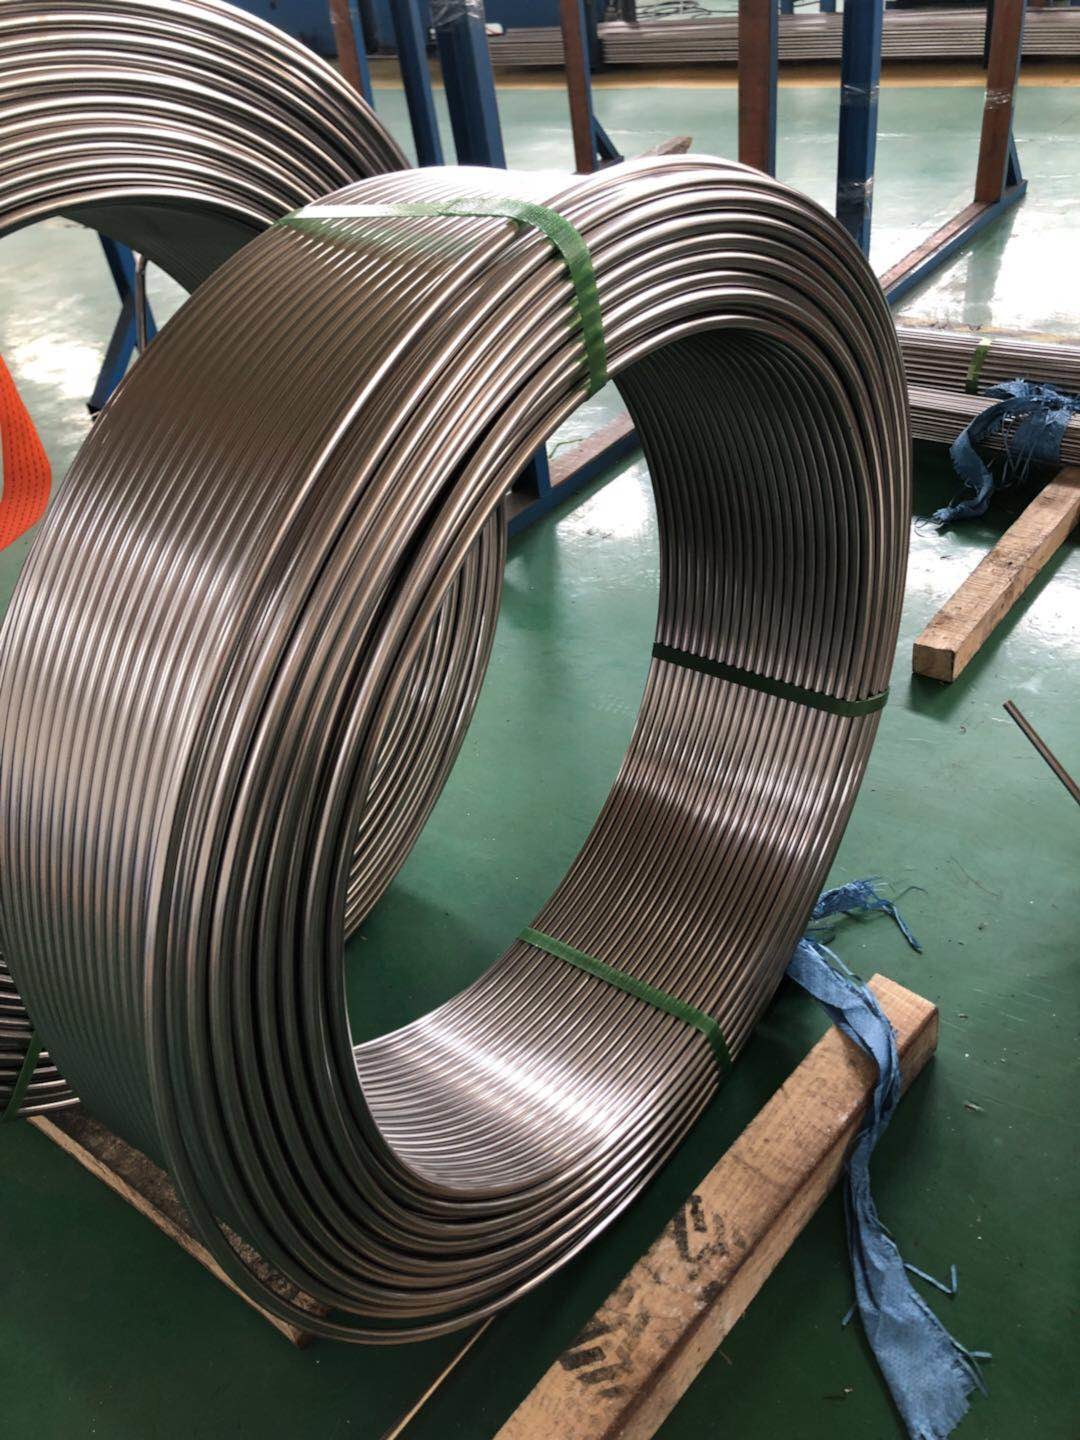 Wholesale Welded Stainless Steel Coil Tubing ASTM A249 269 Standard For Boiler And Condenser from china suppliers